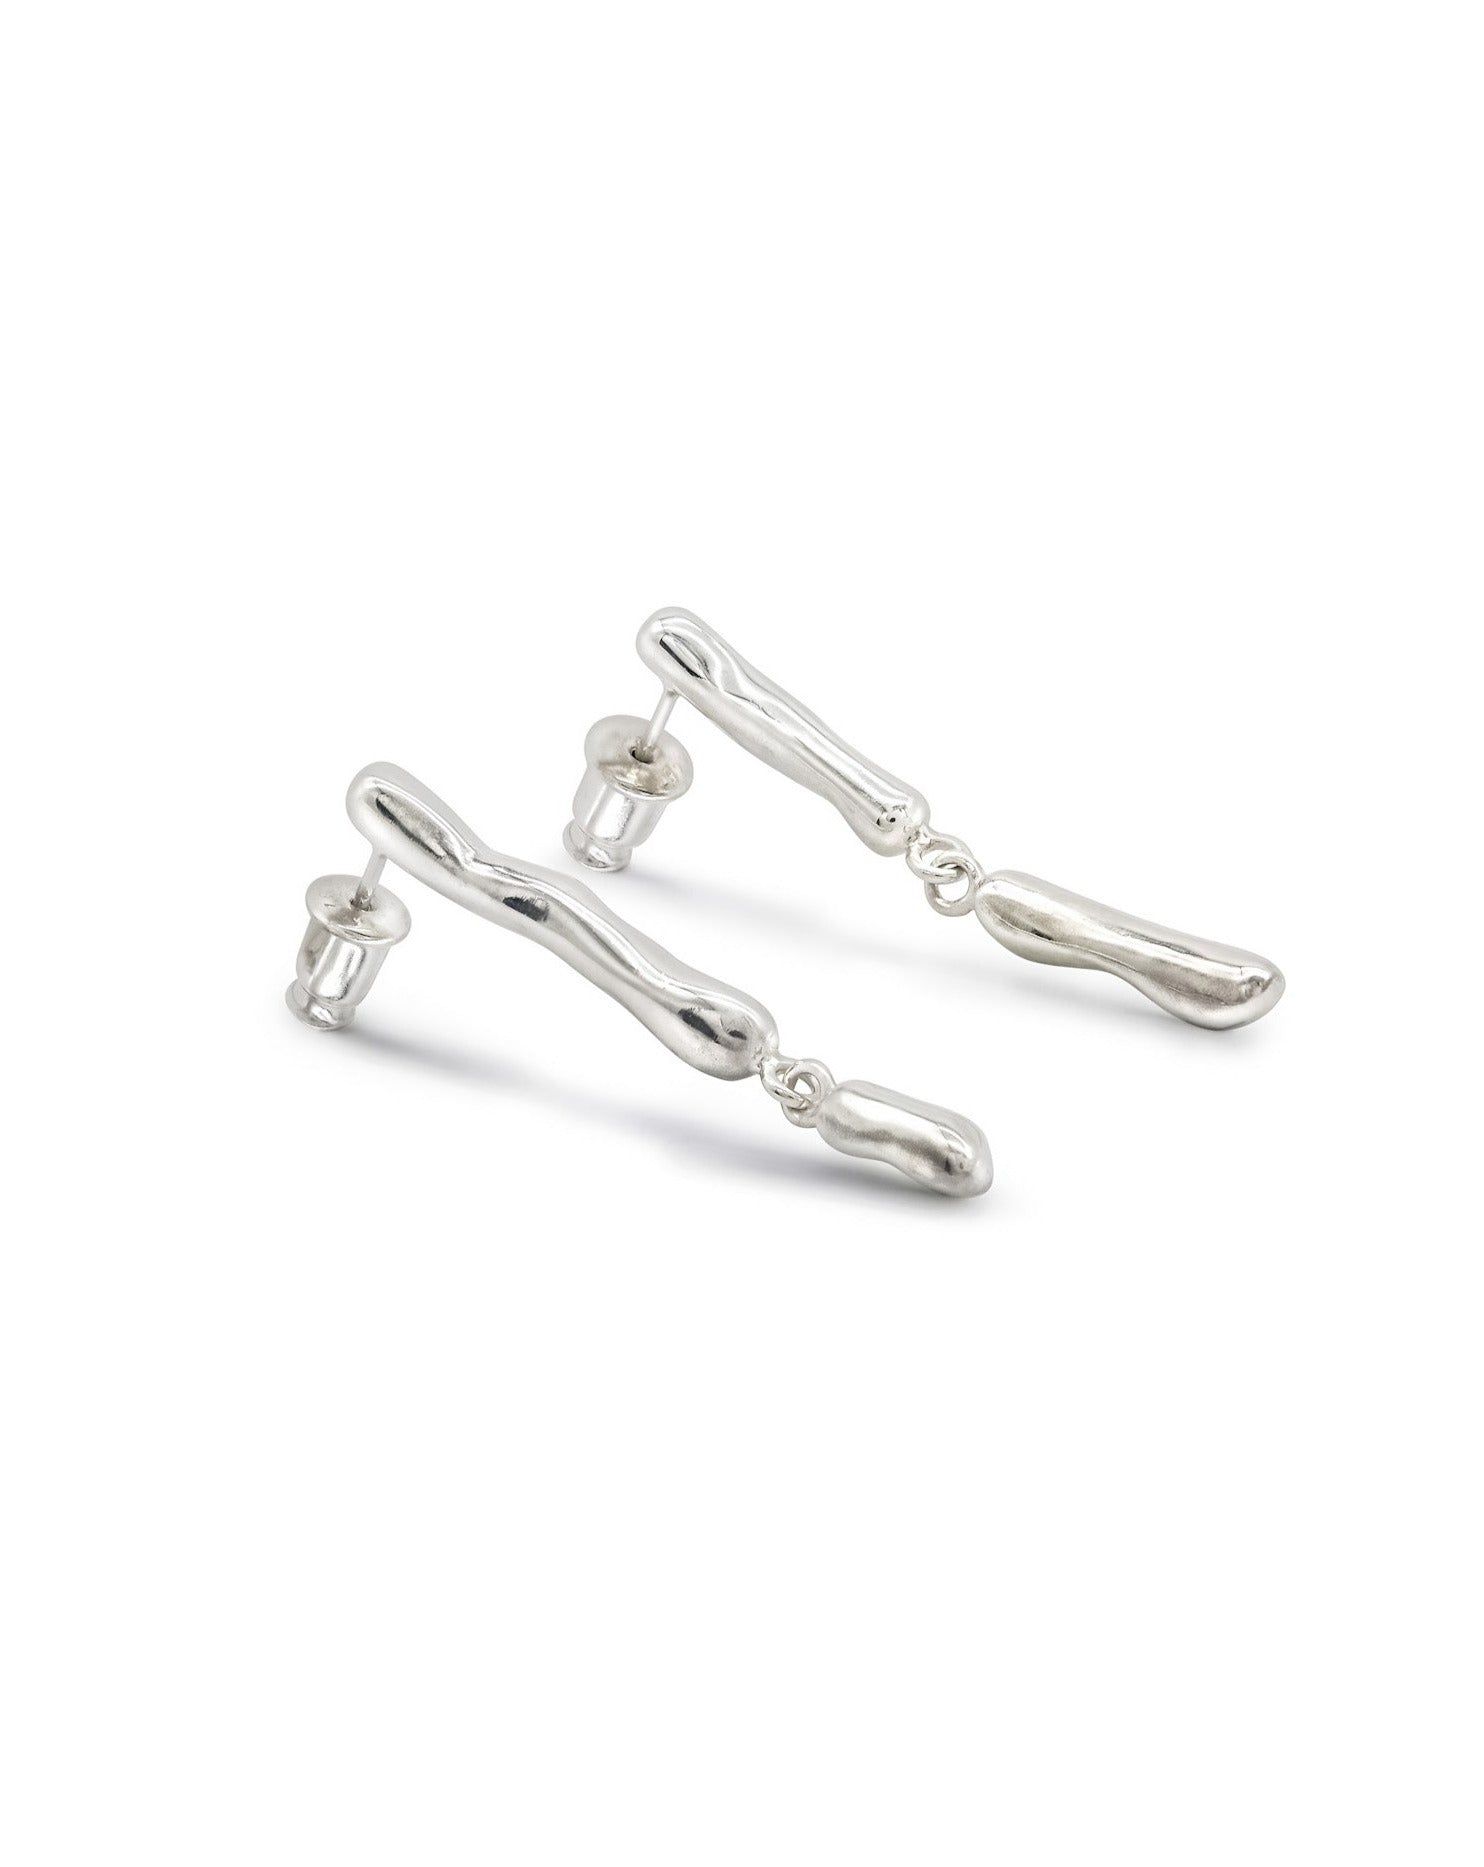 Kharys jewelry organic shaped hanging icicle earrings in 925 sterling silver 